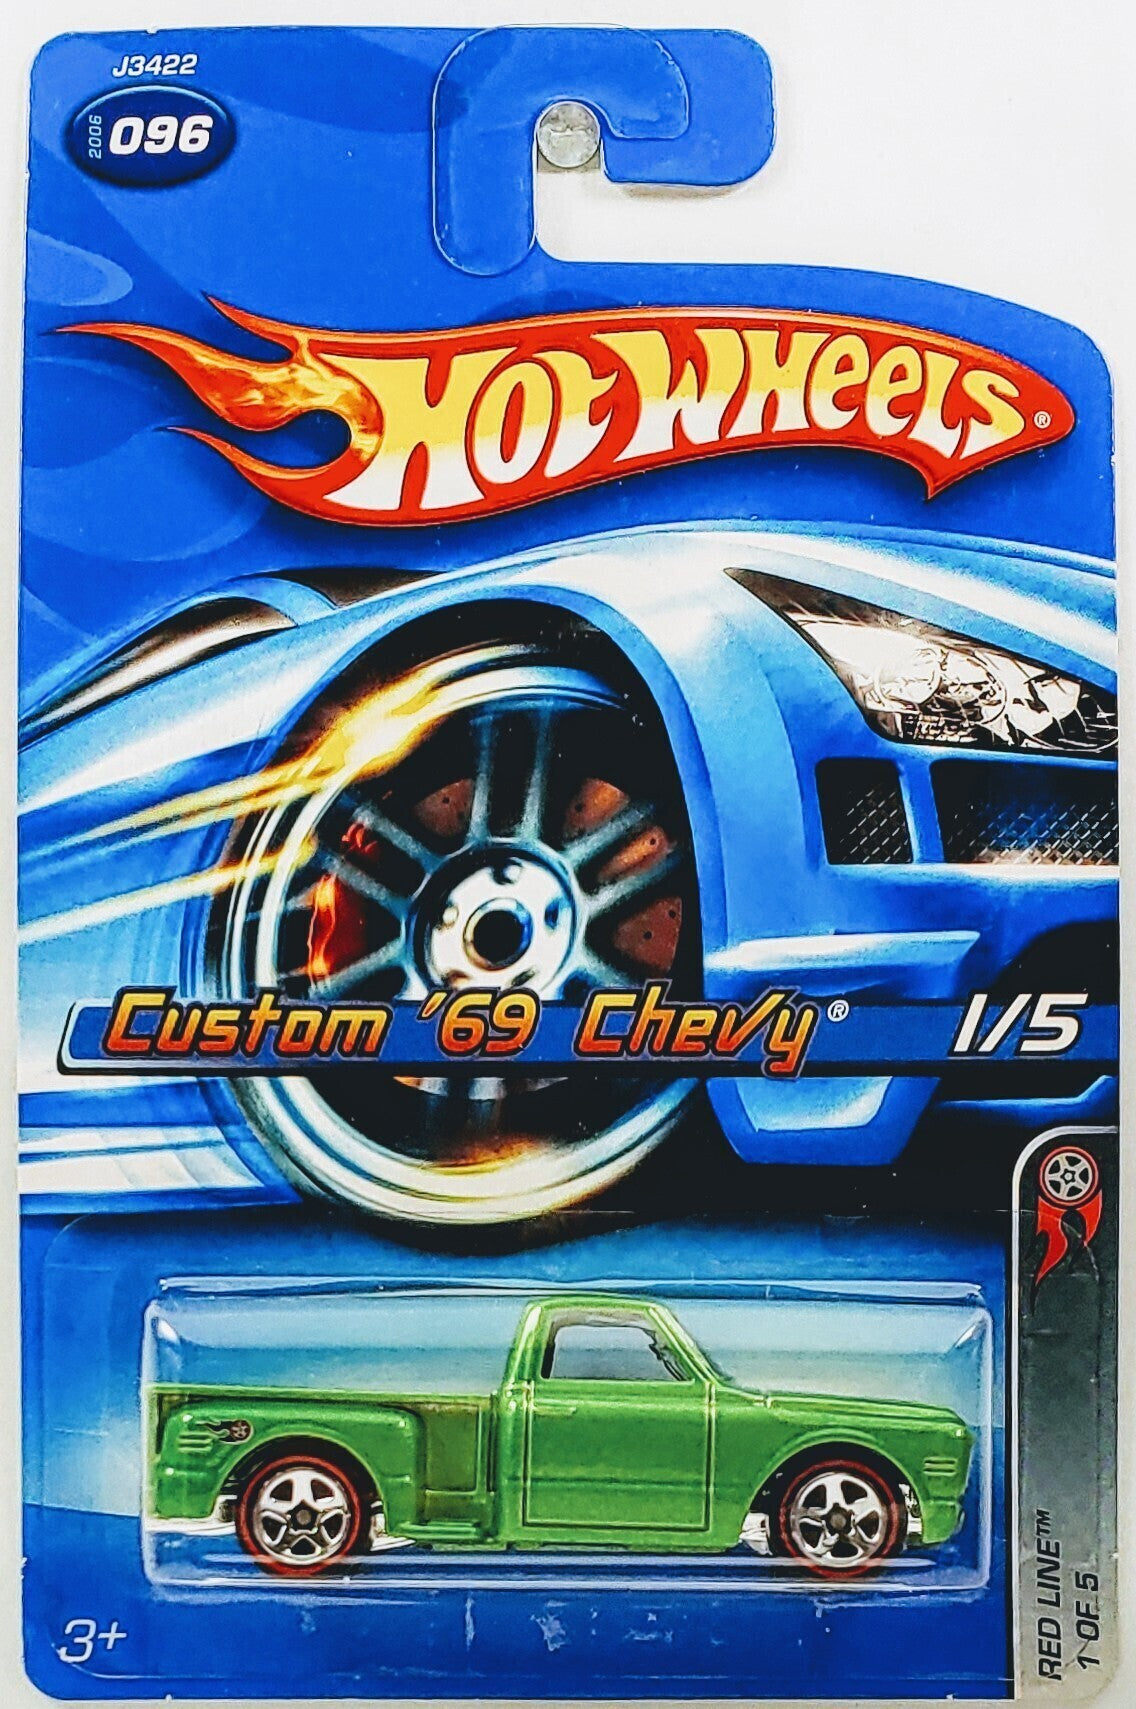 Hot Wheels 2006 - Collector # 096/223 - Red Lines 1/5 - Custom '69 Chevy - Green - USA